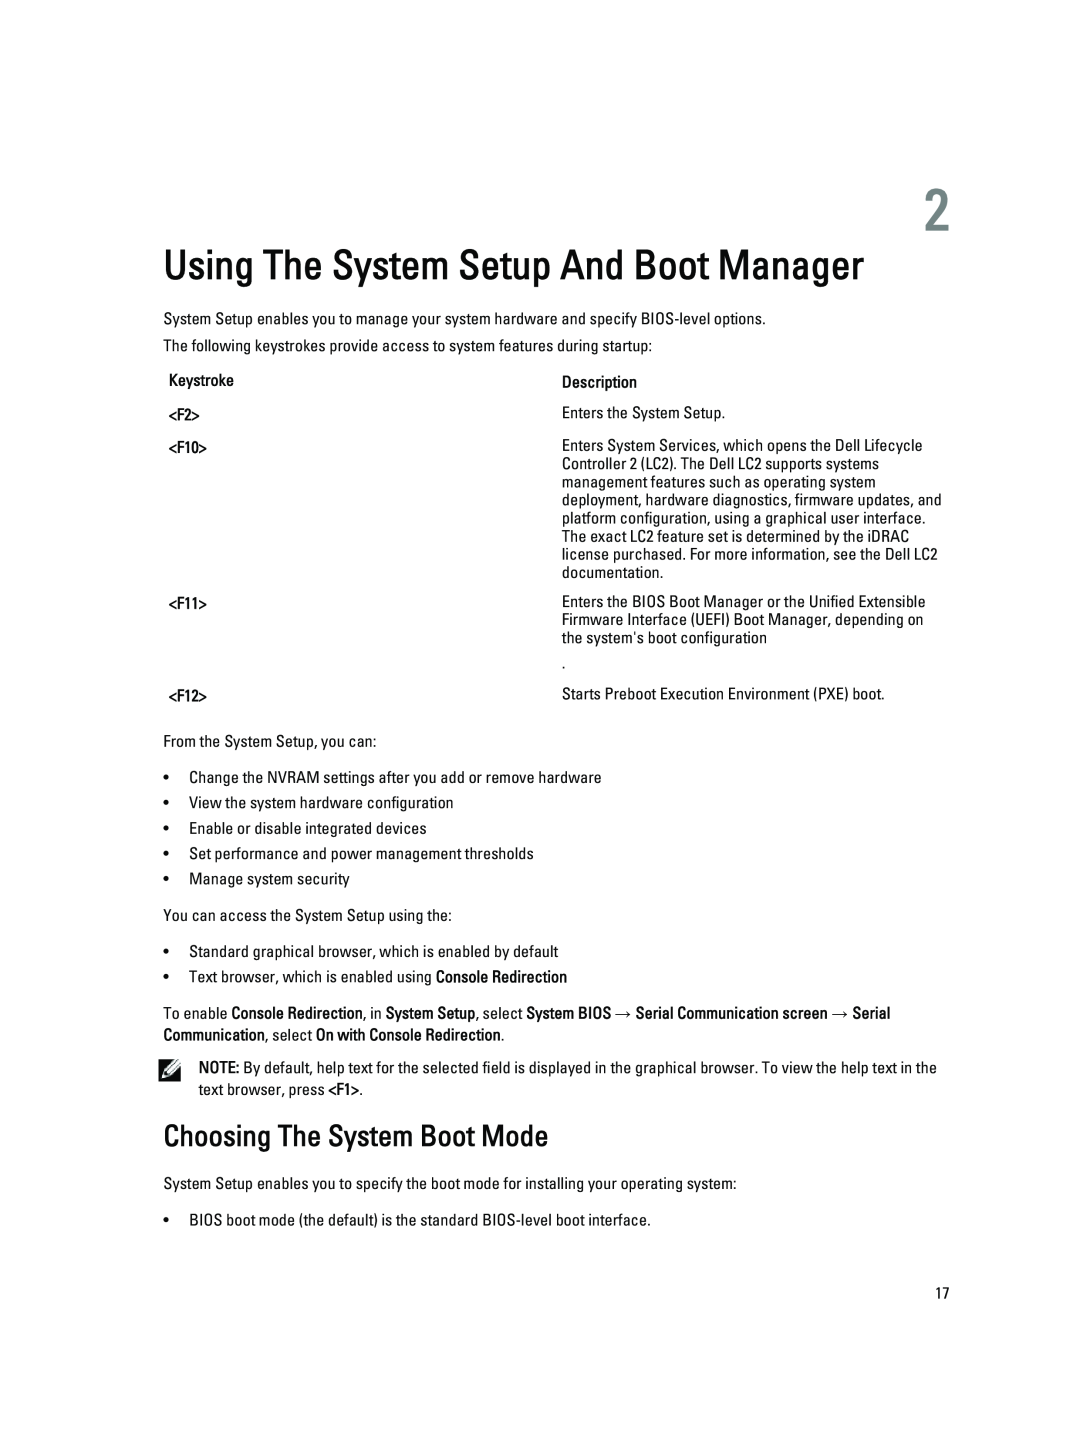 Dell R820 owner manual Using The System Setup And Boot Manager, Choosing The System Boot Mode 